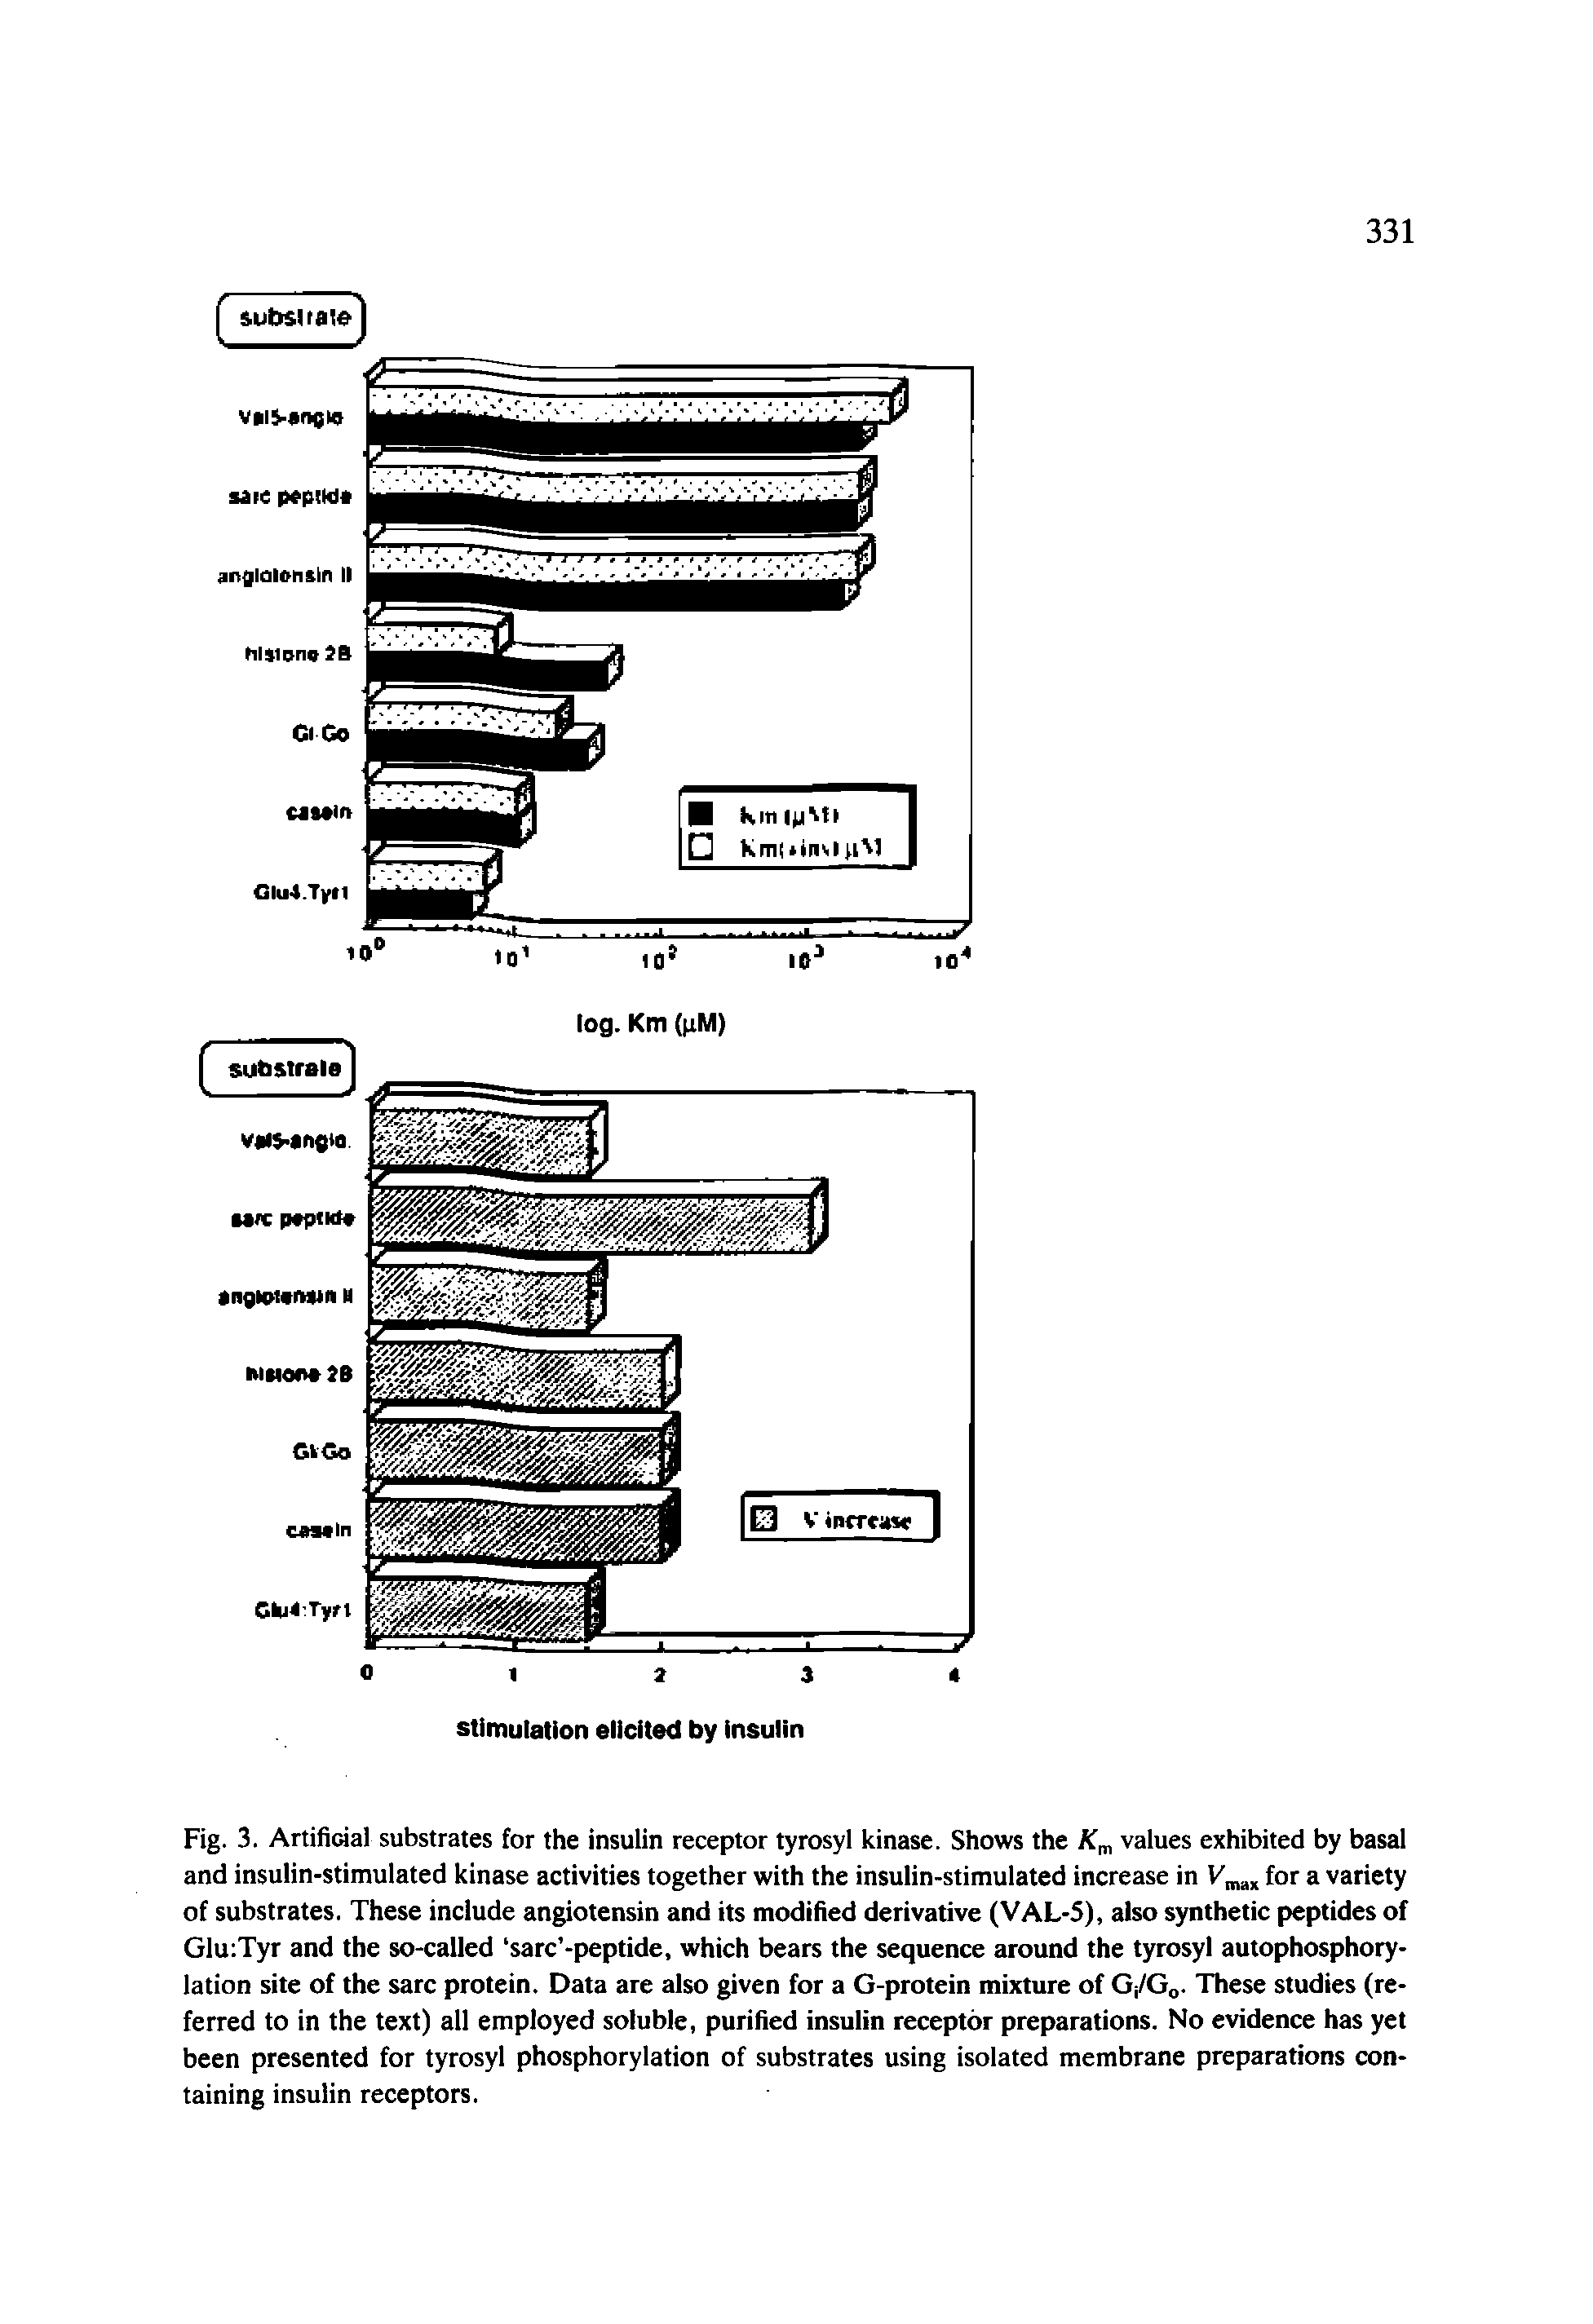 Fig. 3. Artificial substrates for the insulin receptor tyrosyl kinase. Shows the Km values exhibited by basal and insulin-stimulated kinase activities together with the insulin-stimulated increase in Vmax for a variety of substrates. These include angiotensin and its modified derivative (VAL-5), also synthetic peptides of Glu Tyr and the so-called sarc -peptide, which bears the sequence around the tyrosyl autophosphorylation site of the sarc protein. Data are also given for a G-protein mixture of Gj/G0. These studies (referred to in the text) all employed soluble, purified insulin receptor preparations. No evidence has yet been presented for tyrosyl phosphorylation of substrates using isolated membrane preparations containing insulin receptors.